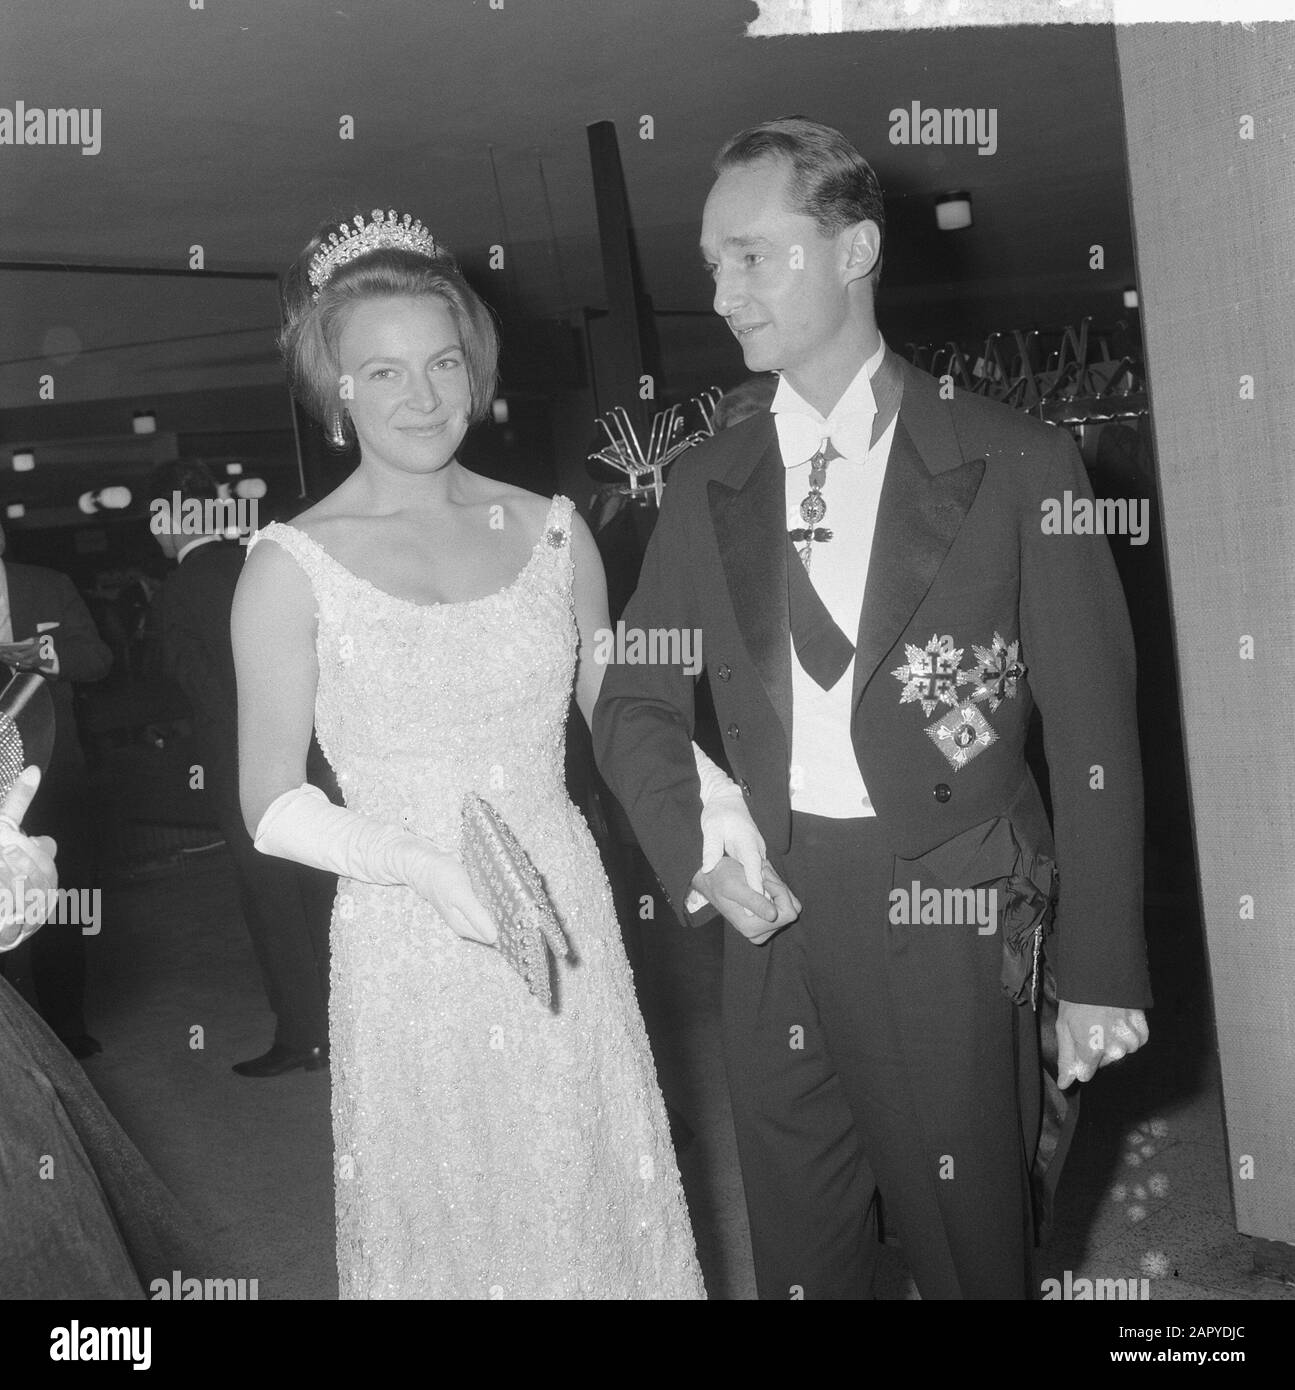 Press ball of German journalists in Bonn, guests of honor Princess Irene and Prince Charles Date: November 6, 1964 Location: Bonn Keywords: JOURNALISS Personal name: Charles, Prince of Wales, Irene princess Stock Photo